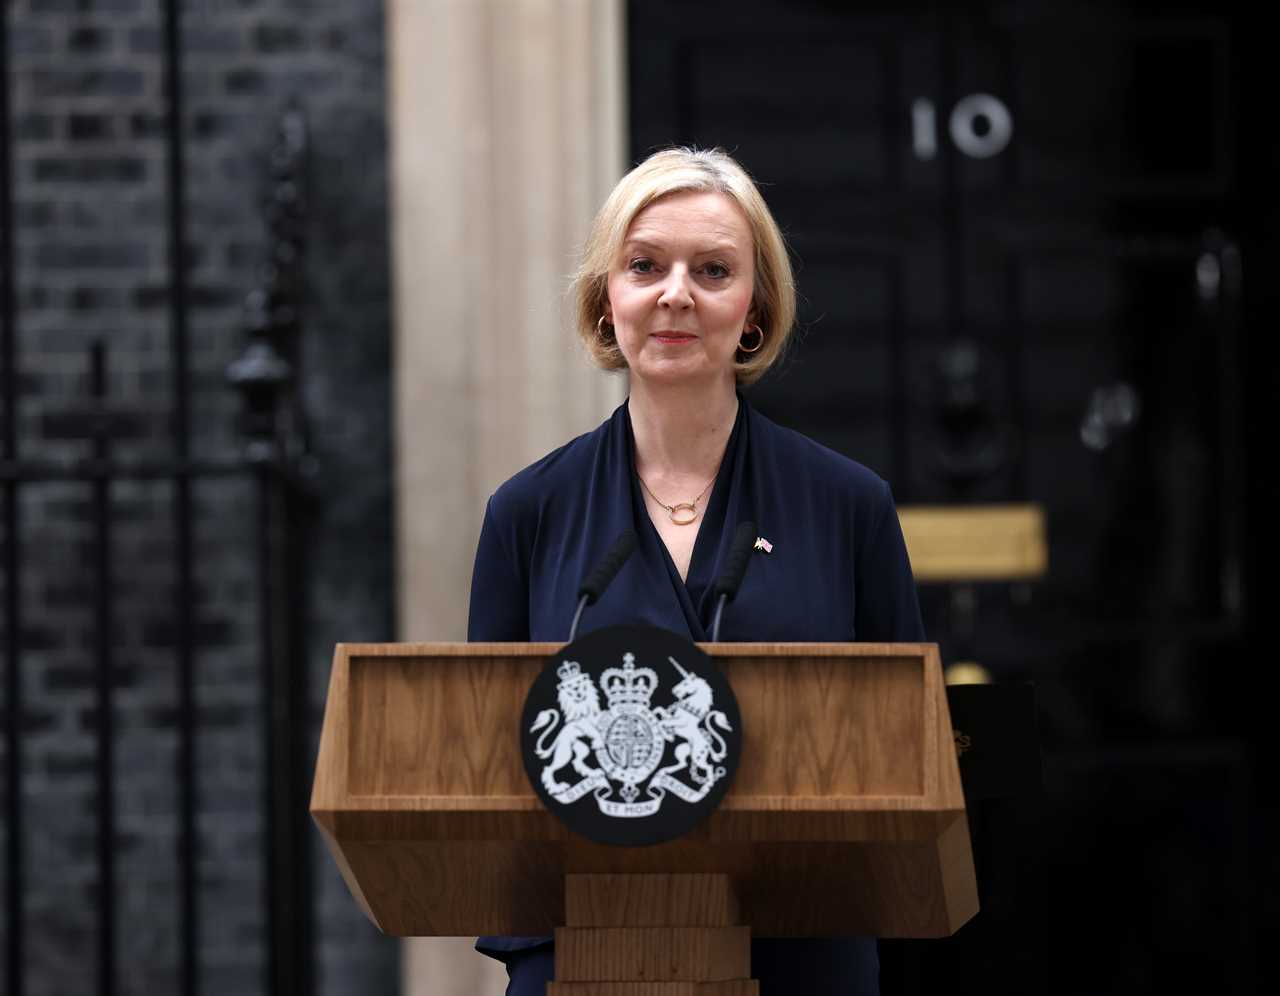 Seven crucial mistakes Liz Truss made that saw PM forced out after just 44 days – and the final nail in her coffin